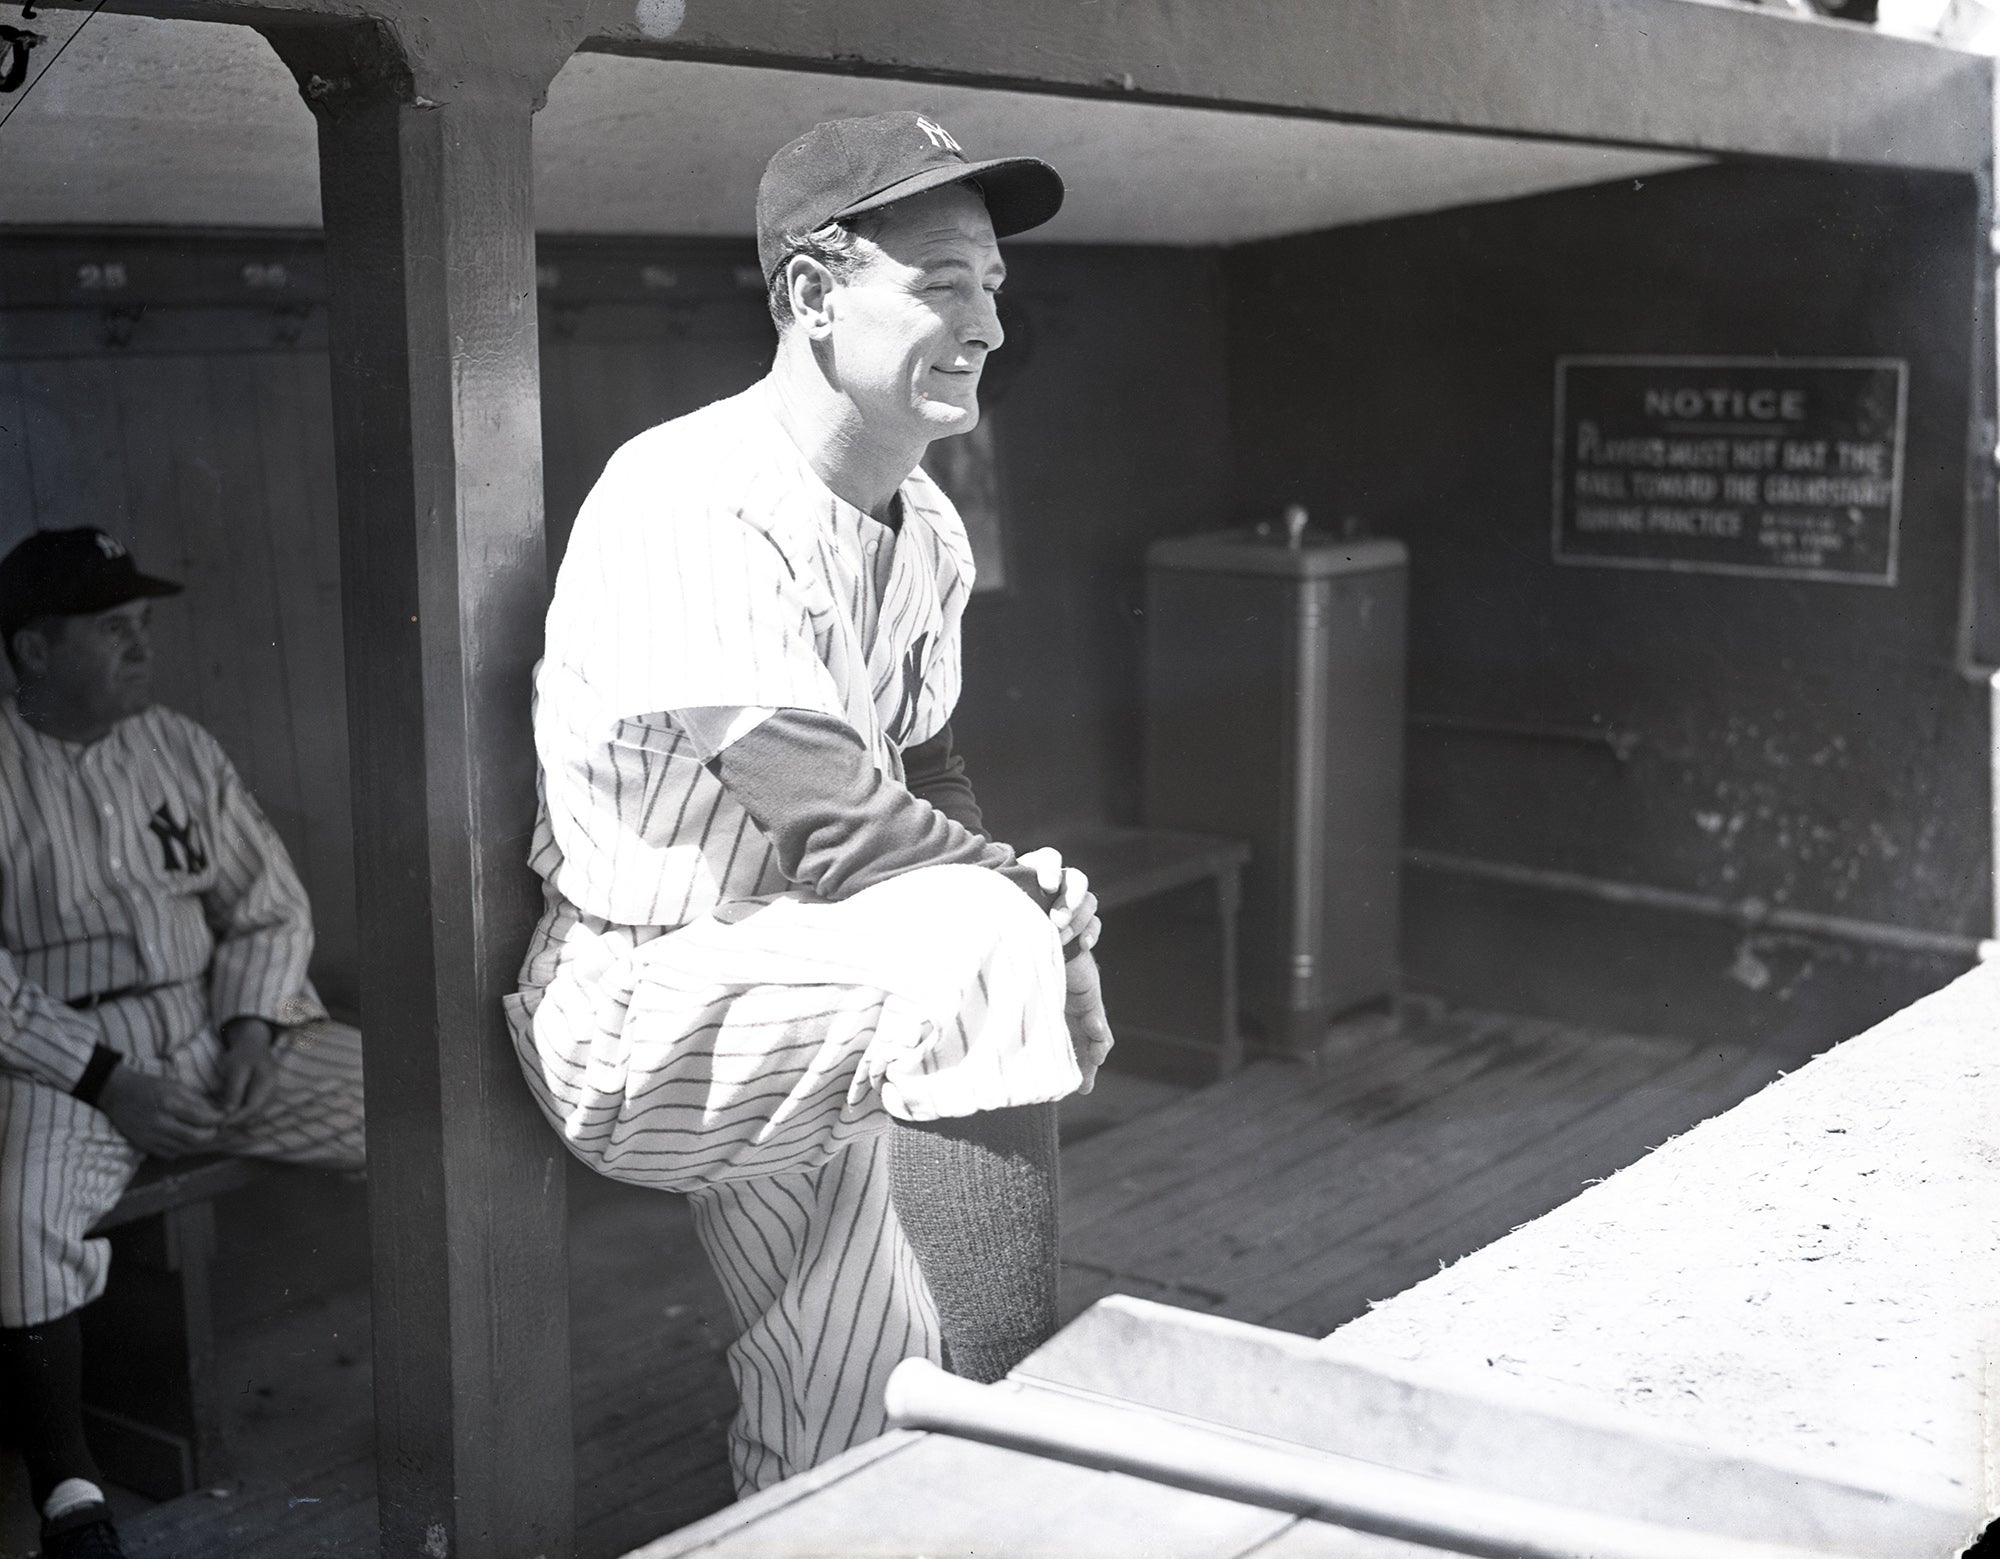 Lou Gehrig's final years